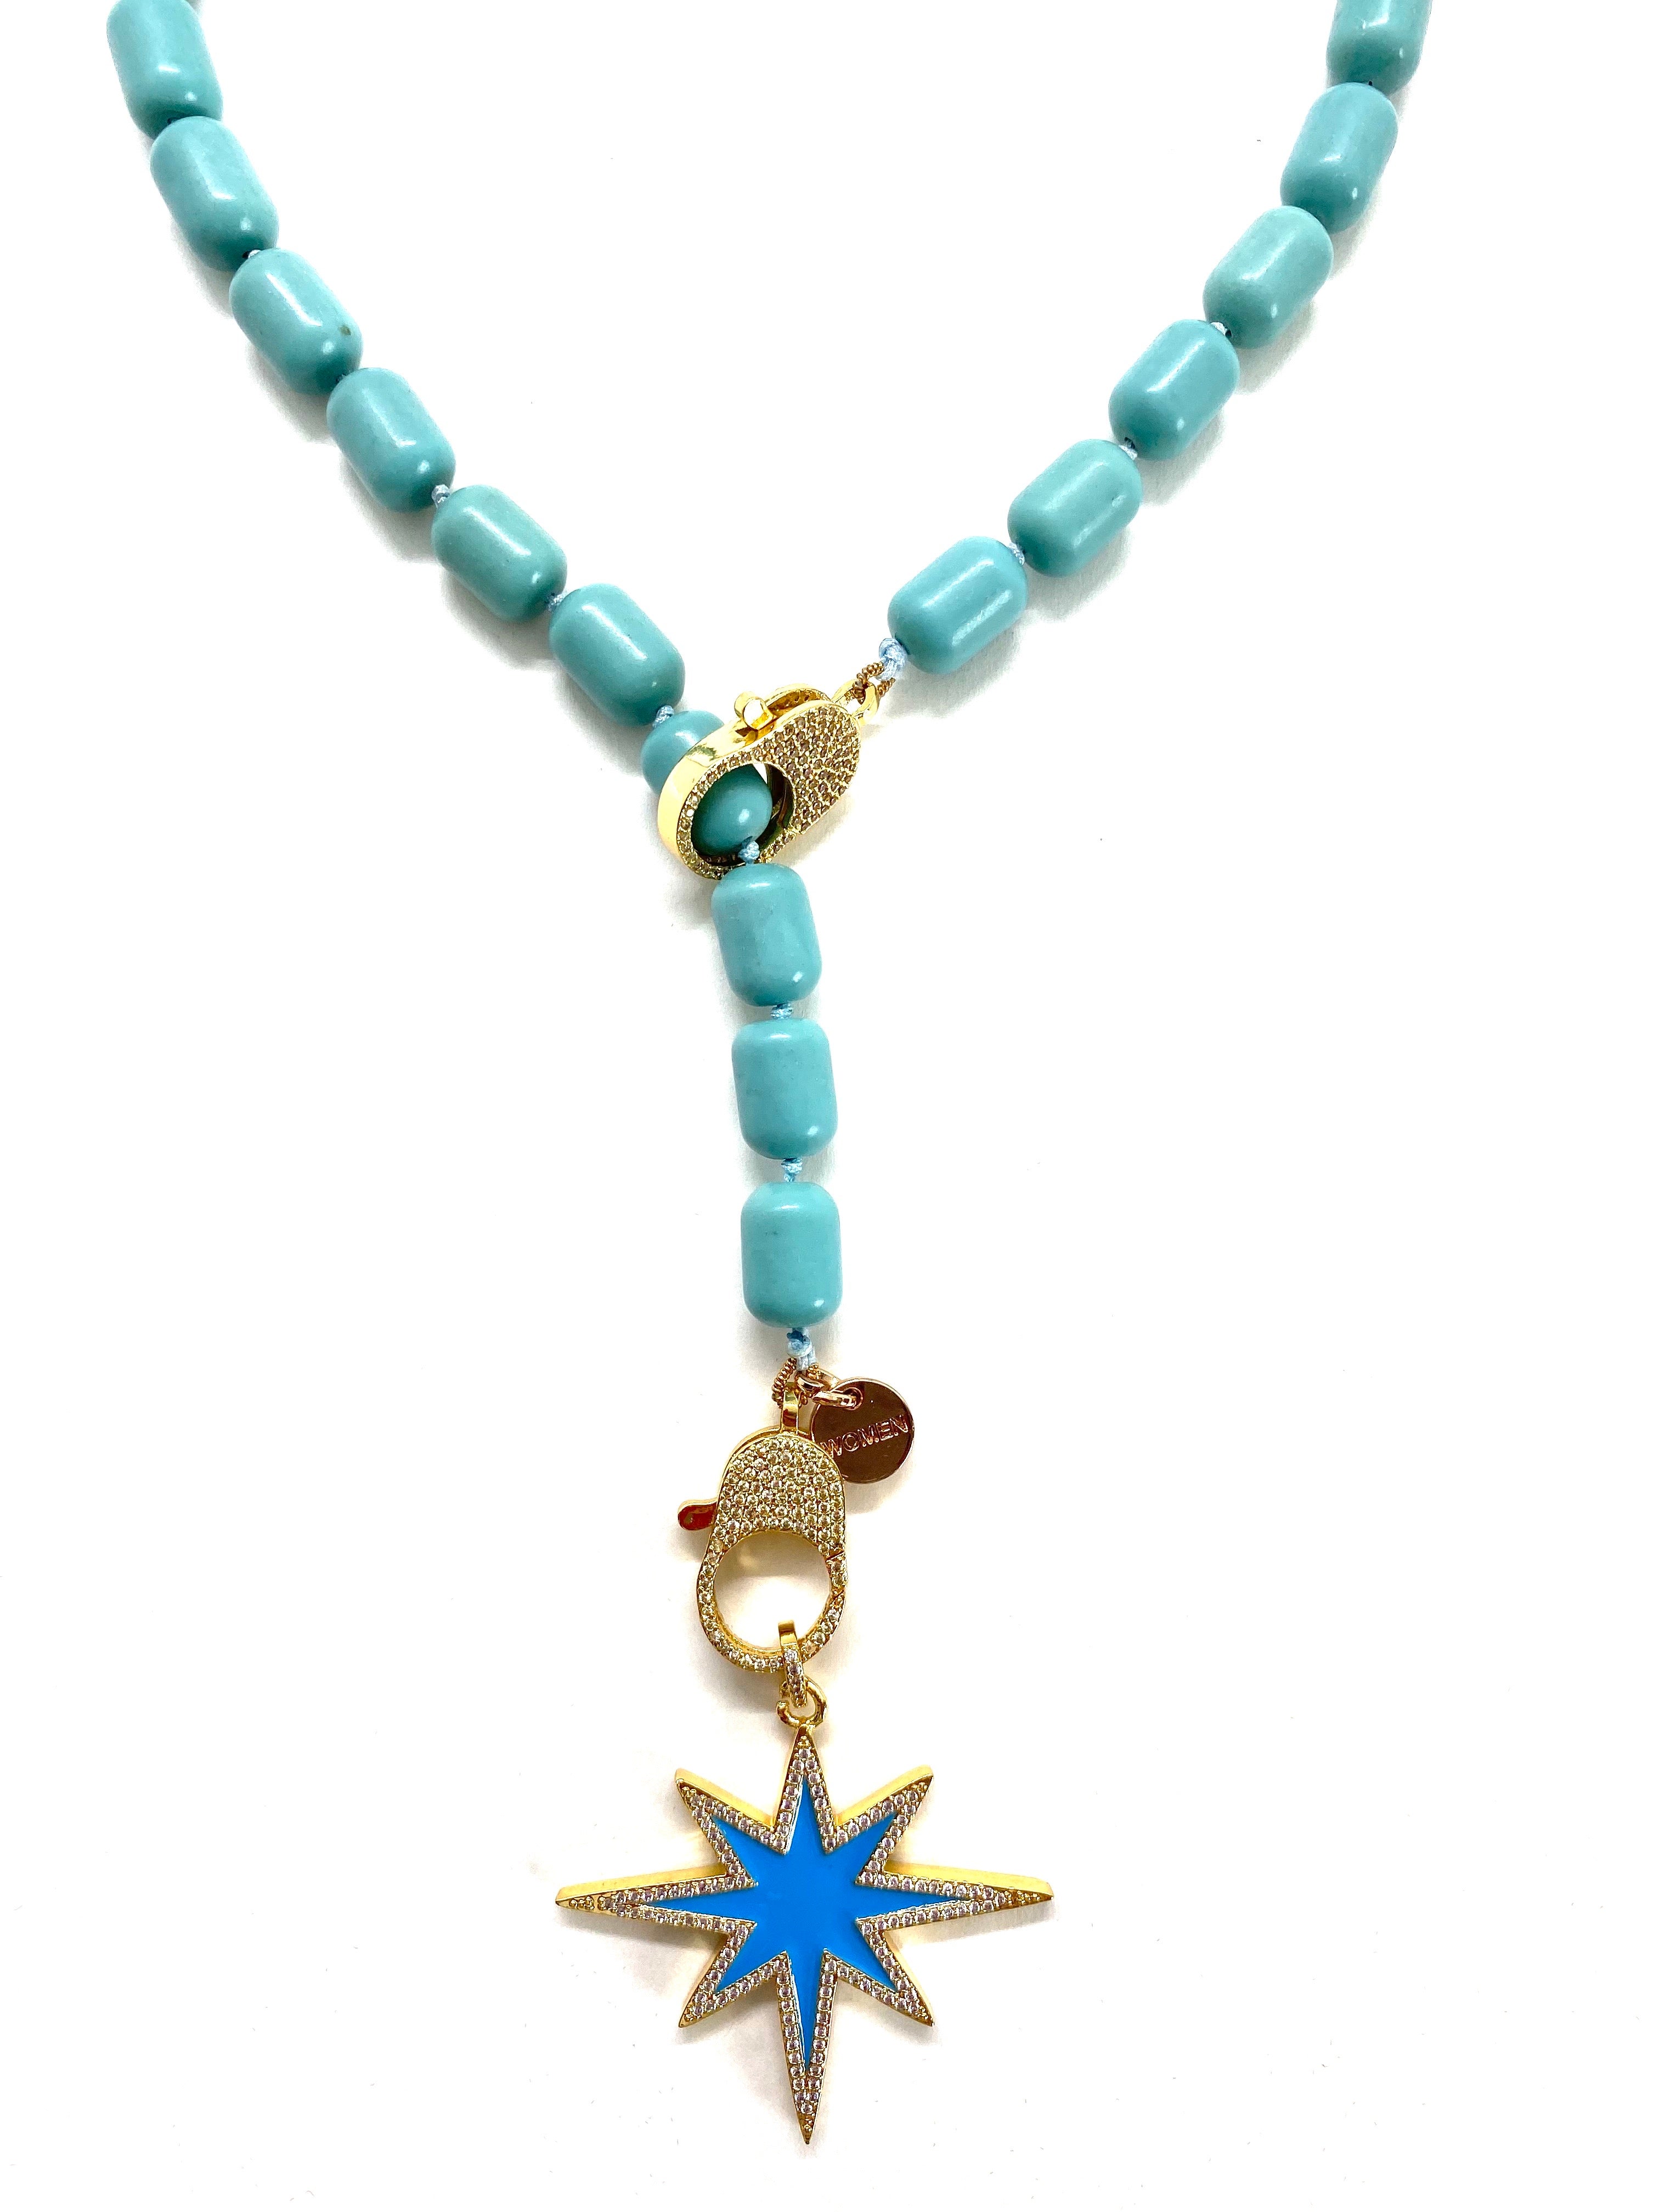 Turquoise Gaia necklace, blue star pendant, gold zirconia clips